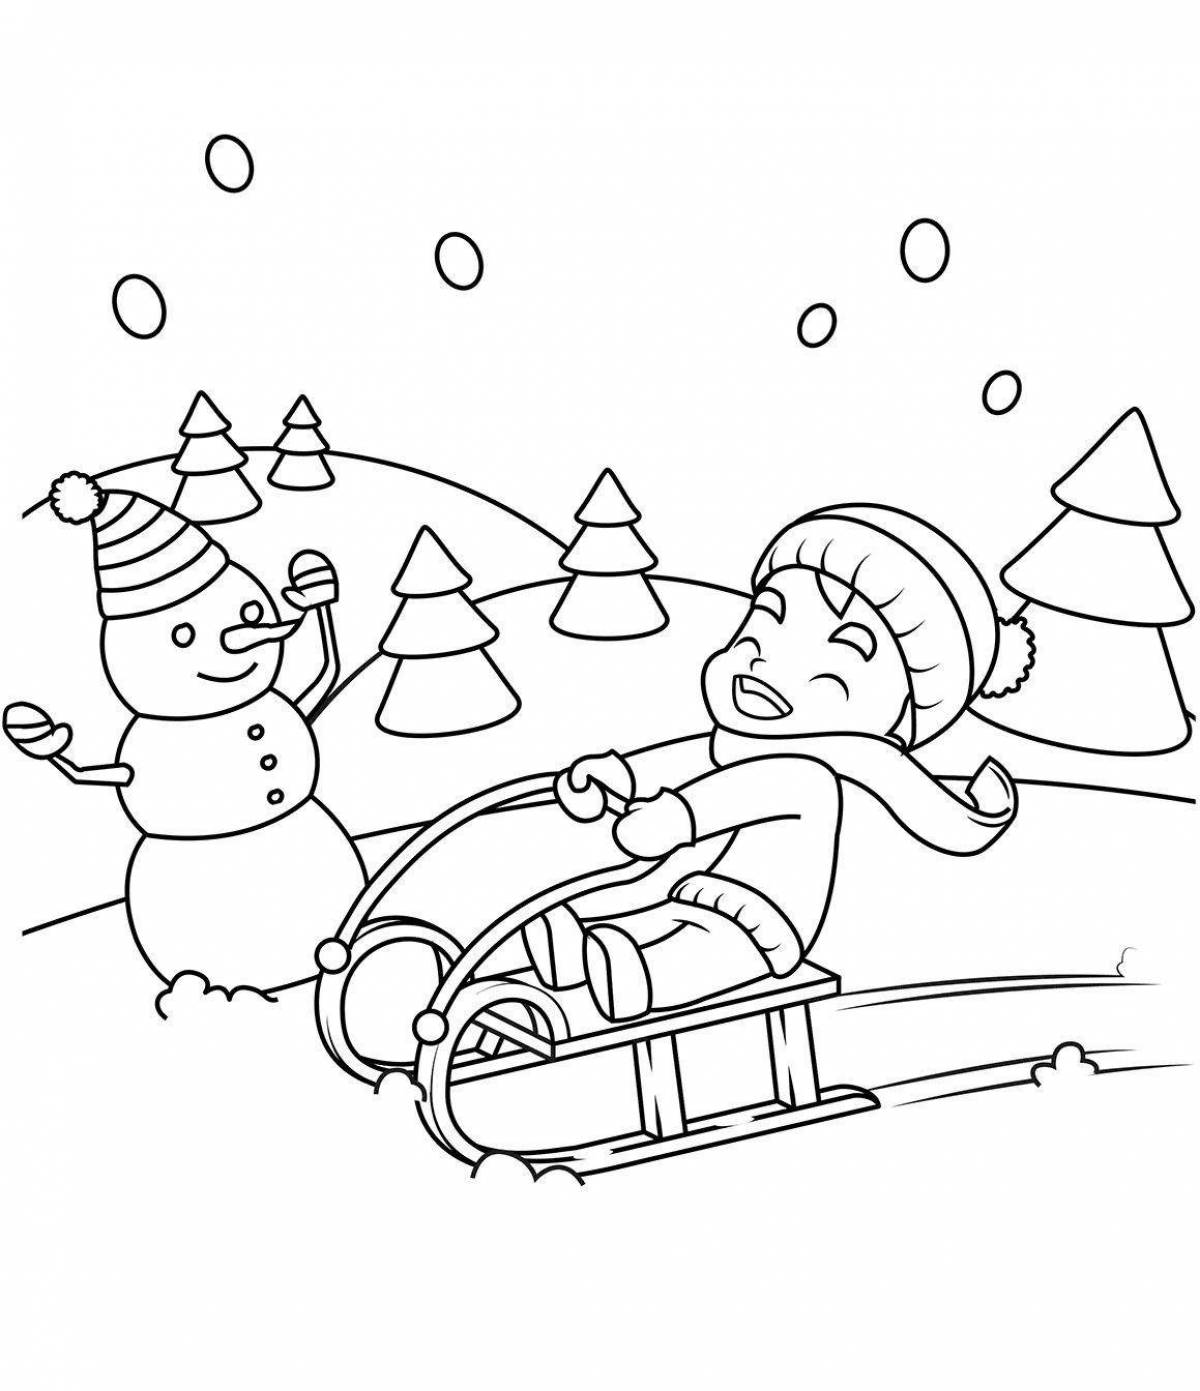 Exquisite winter games coloring book